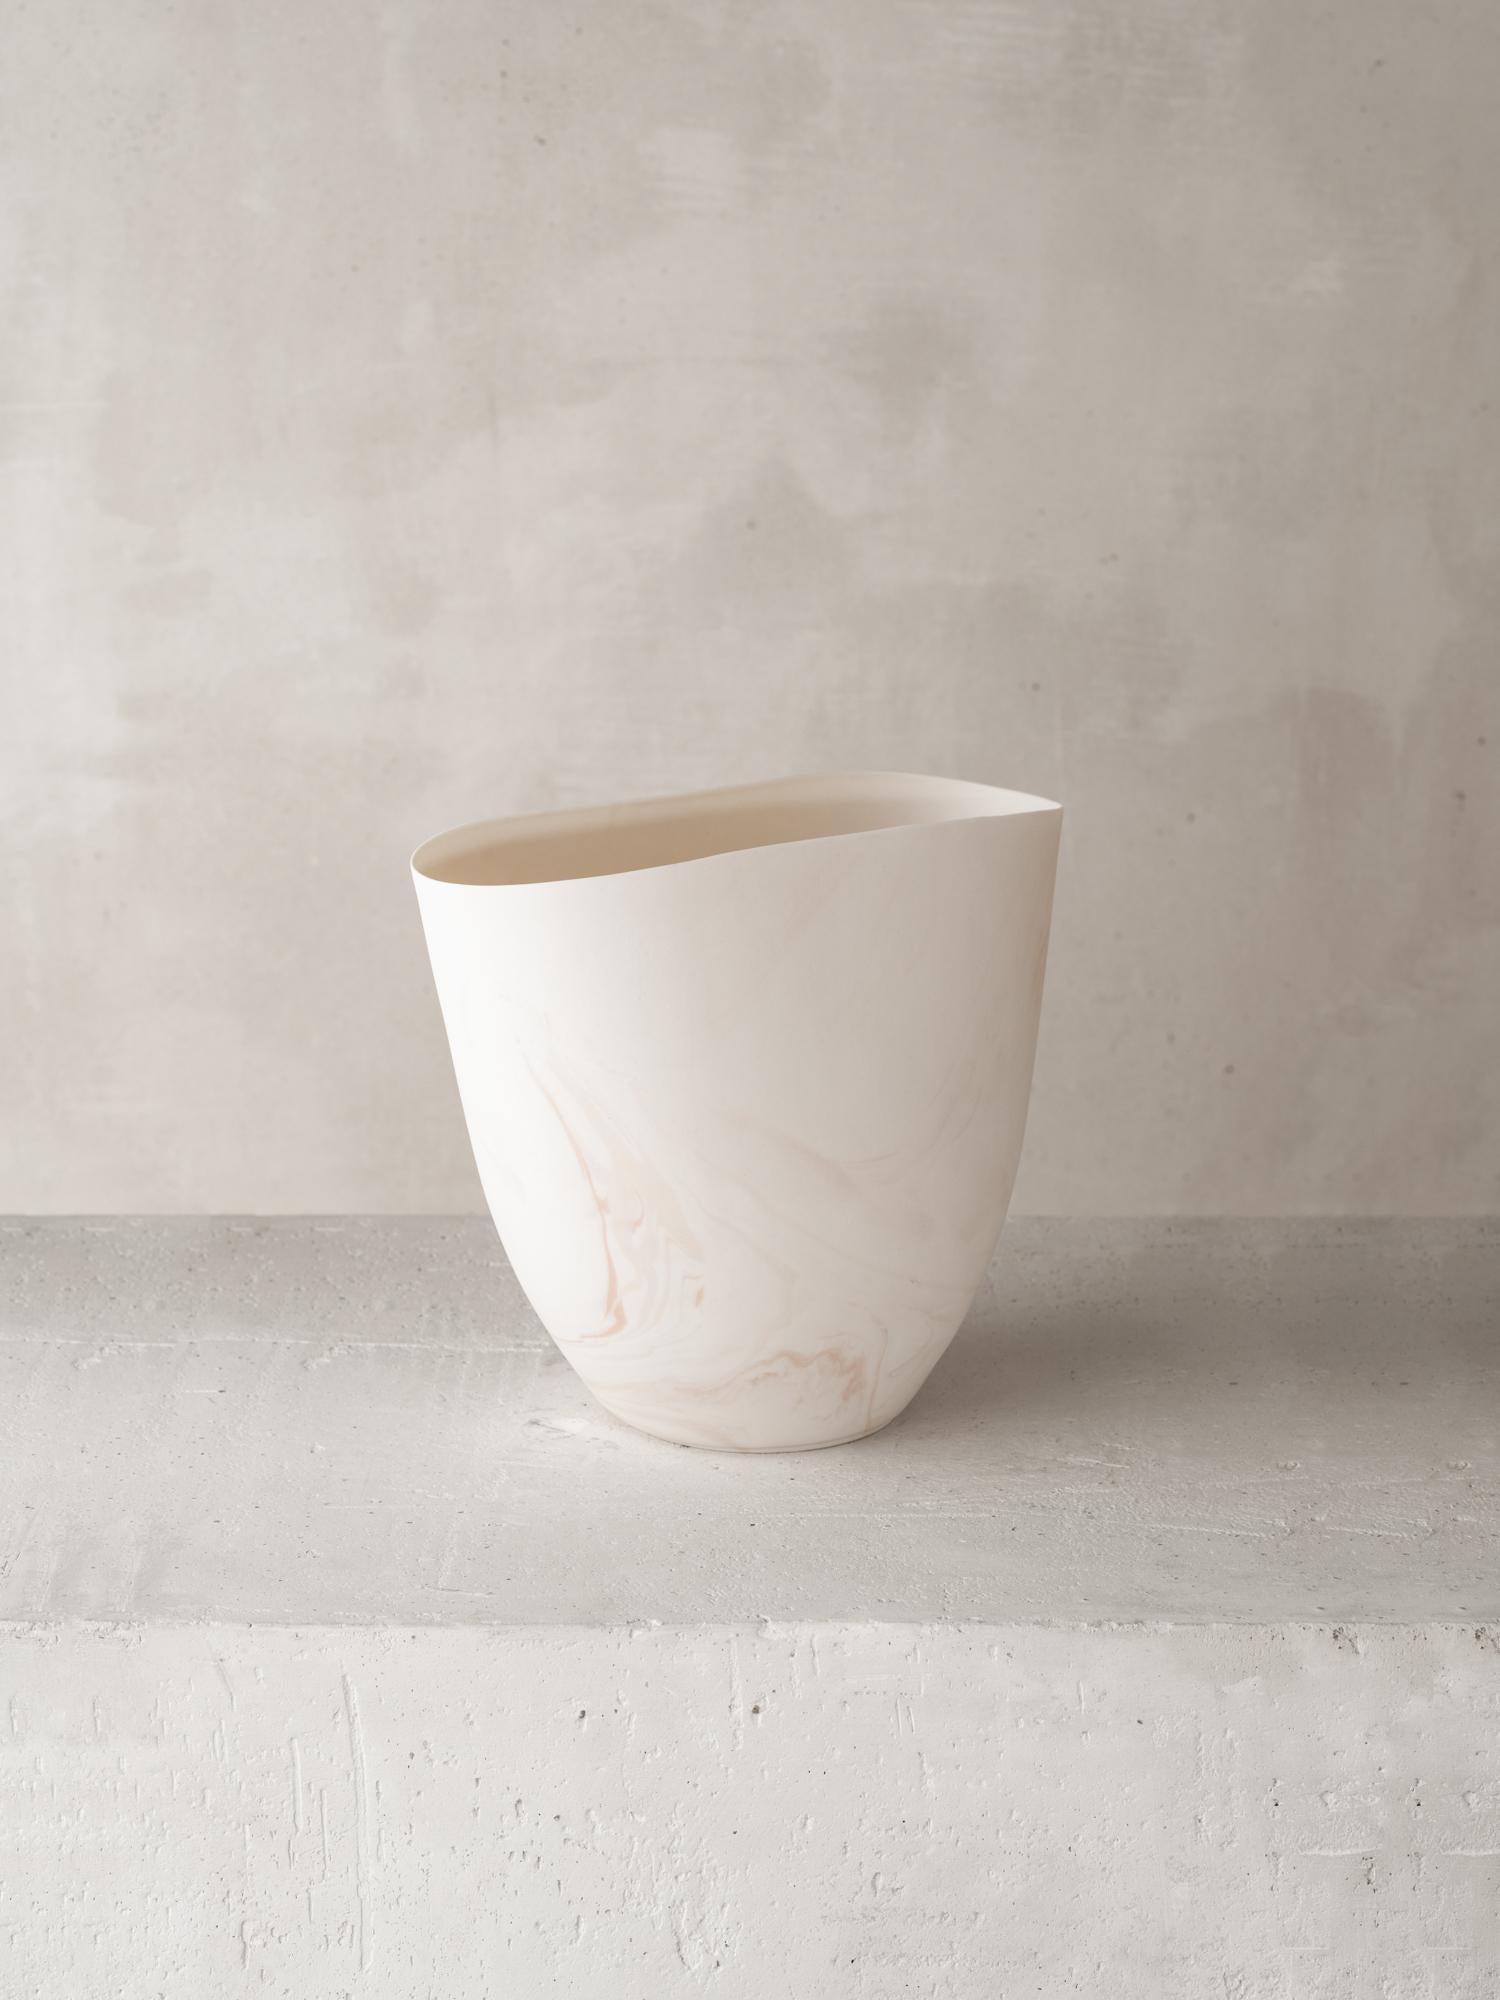 Materials: Cast Porcelain with Colored Oxide 

For over forty years Katherine Glenday has been creating meditative ceramic and porcelain pieces by hand in her South African studio. Remarkable in their translucency and luminosity, the porcelain